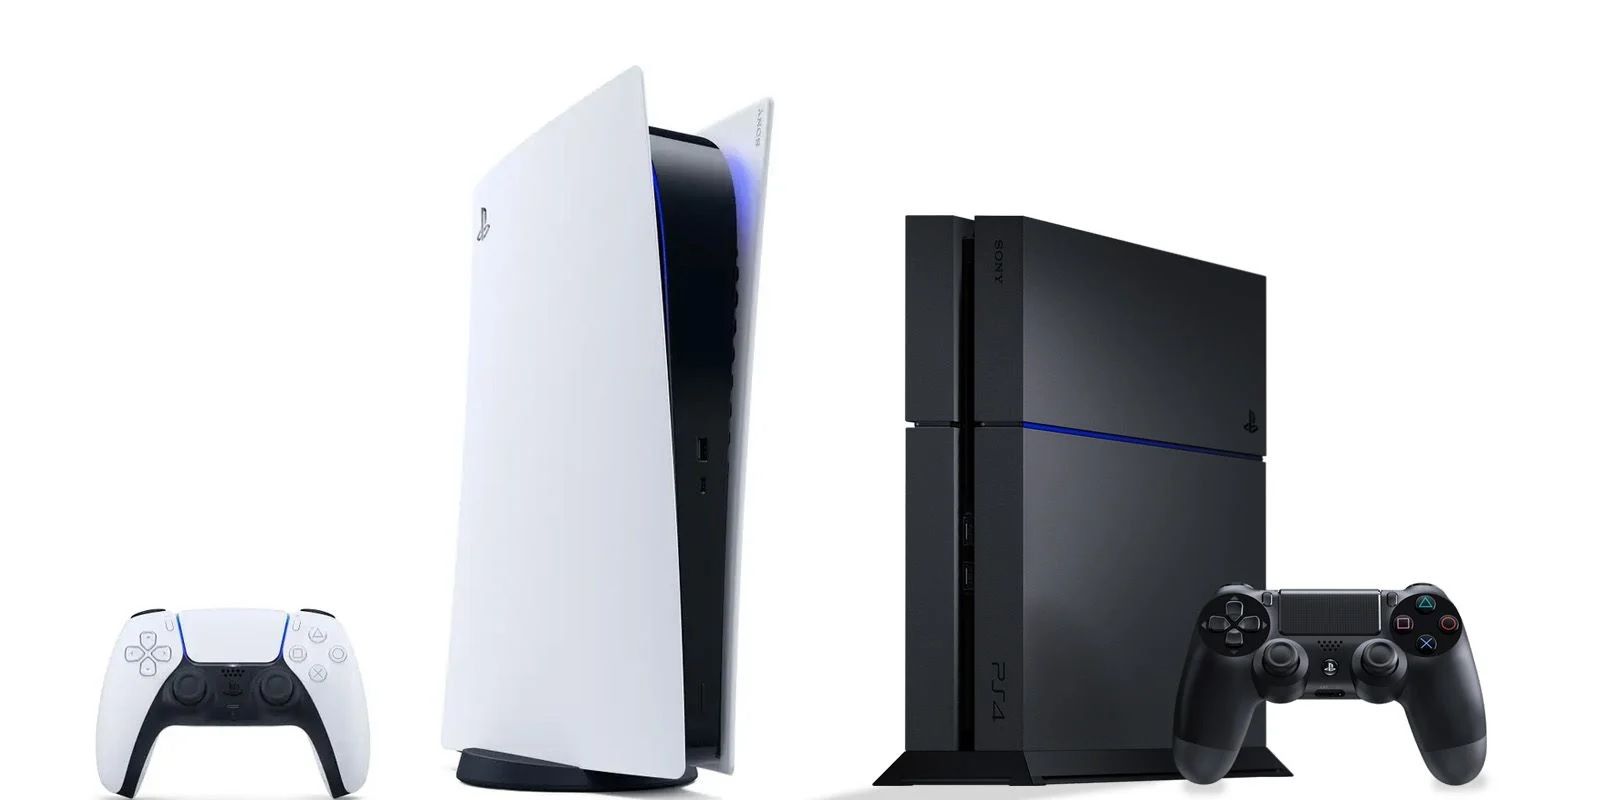 PlayStation 4 Reportedly Outsells PS5 in Some Markets